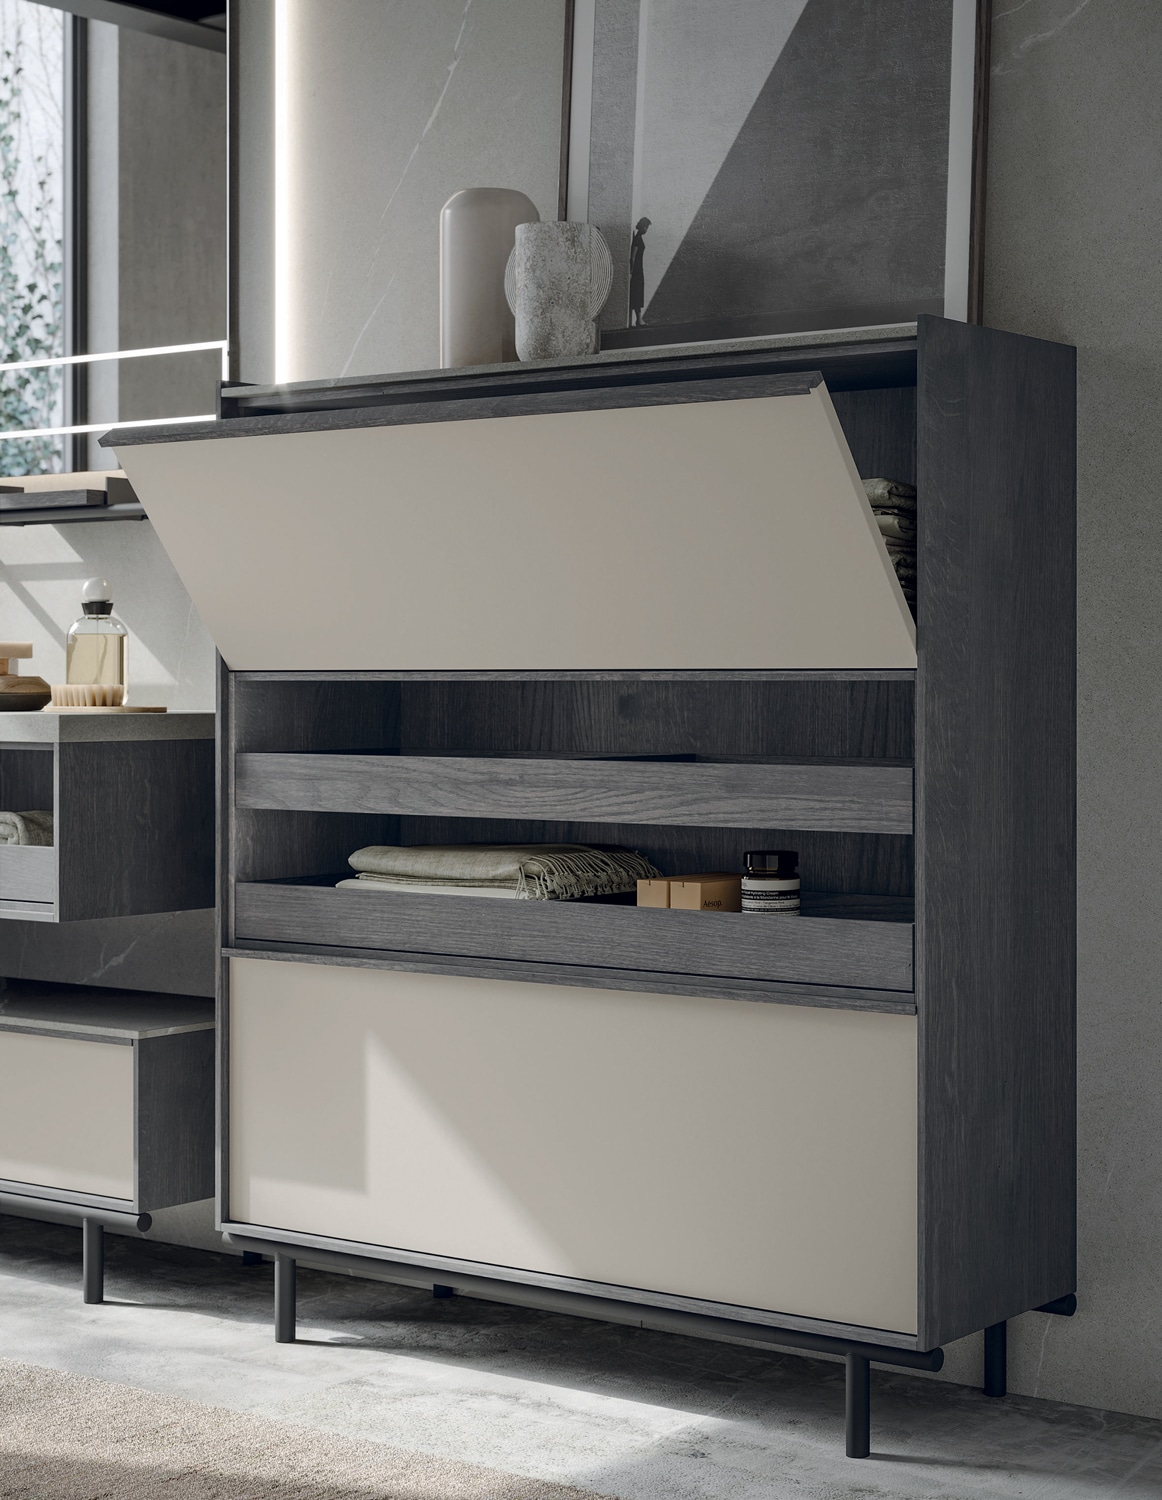 The versatile Sartus storage system offers closed spaces and open drawers. 